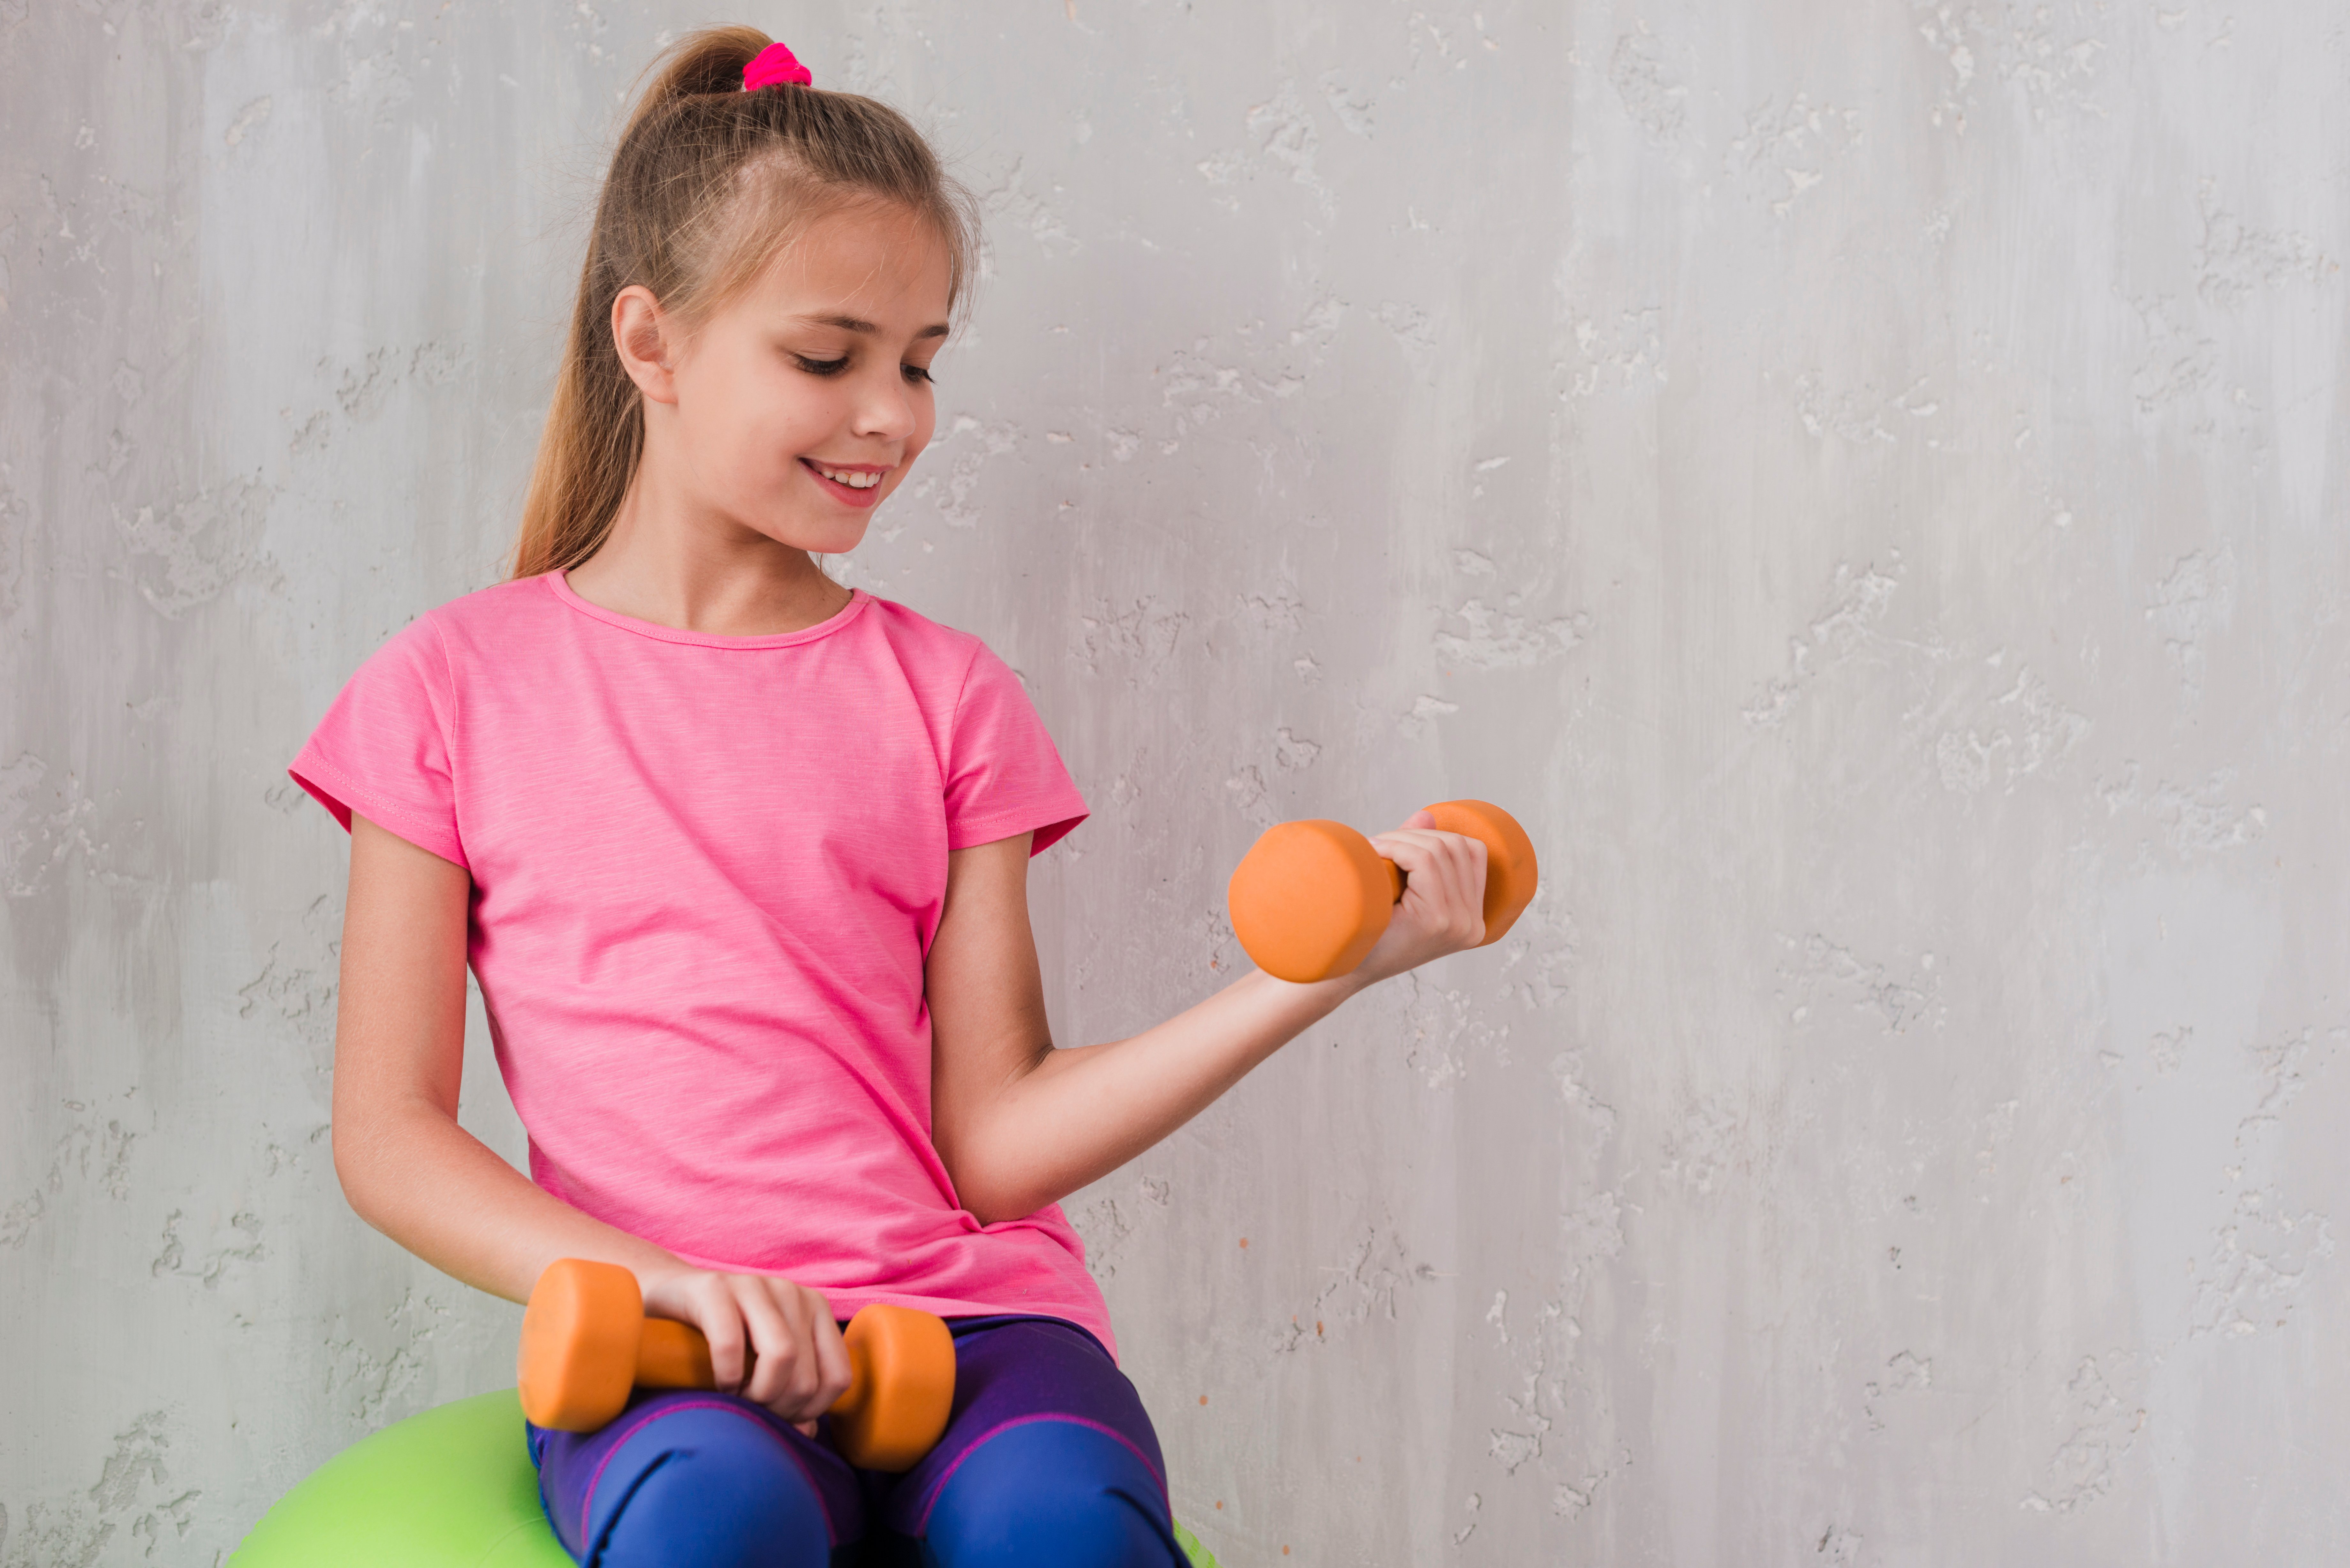 smiling-portrait-of-a-girl-exercising-with-dumbbell-against-wall